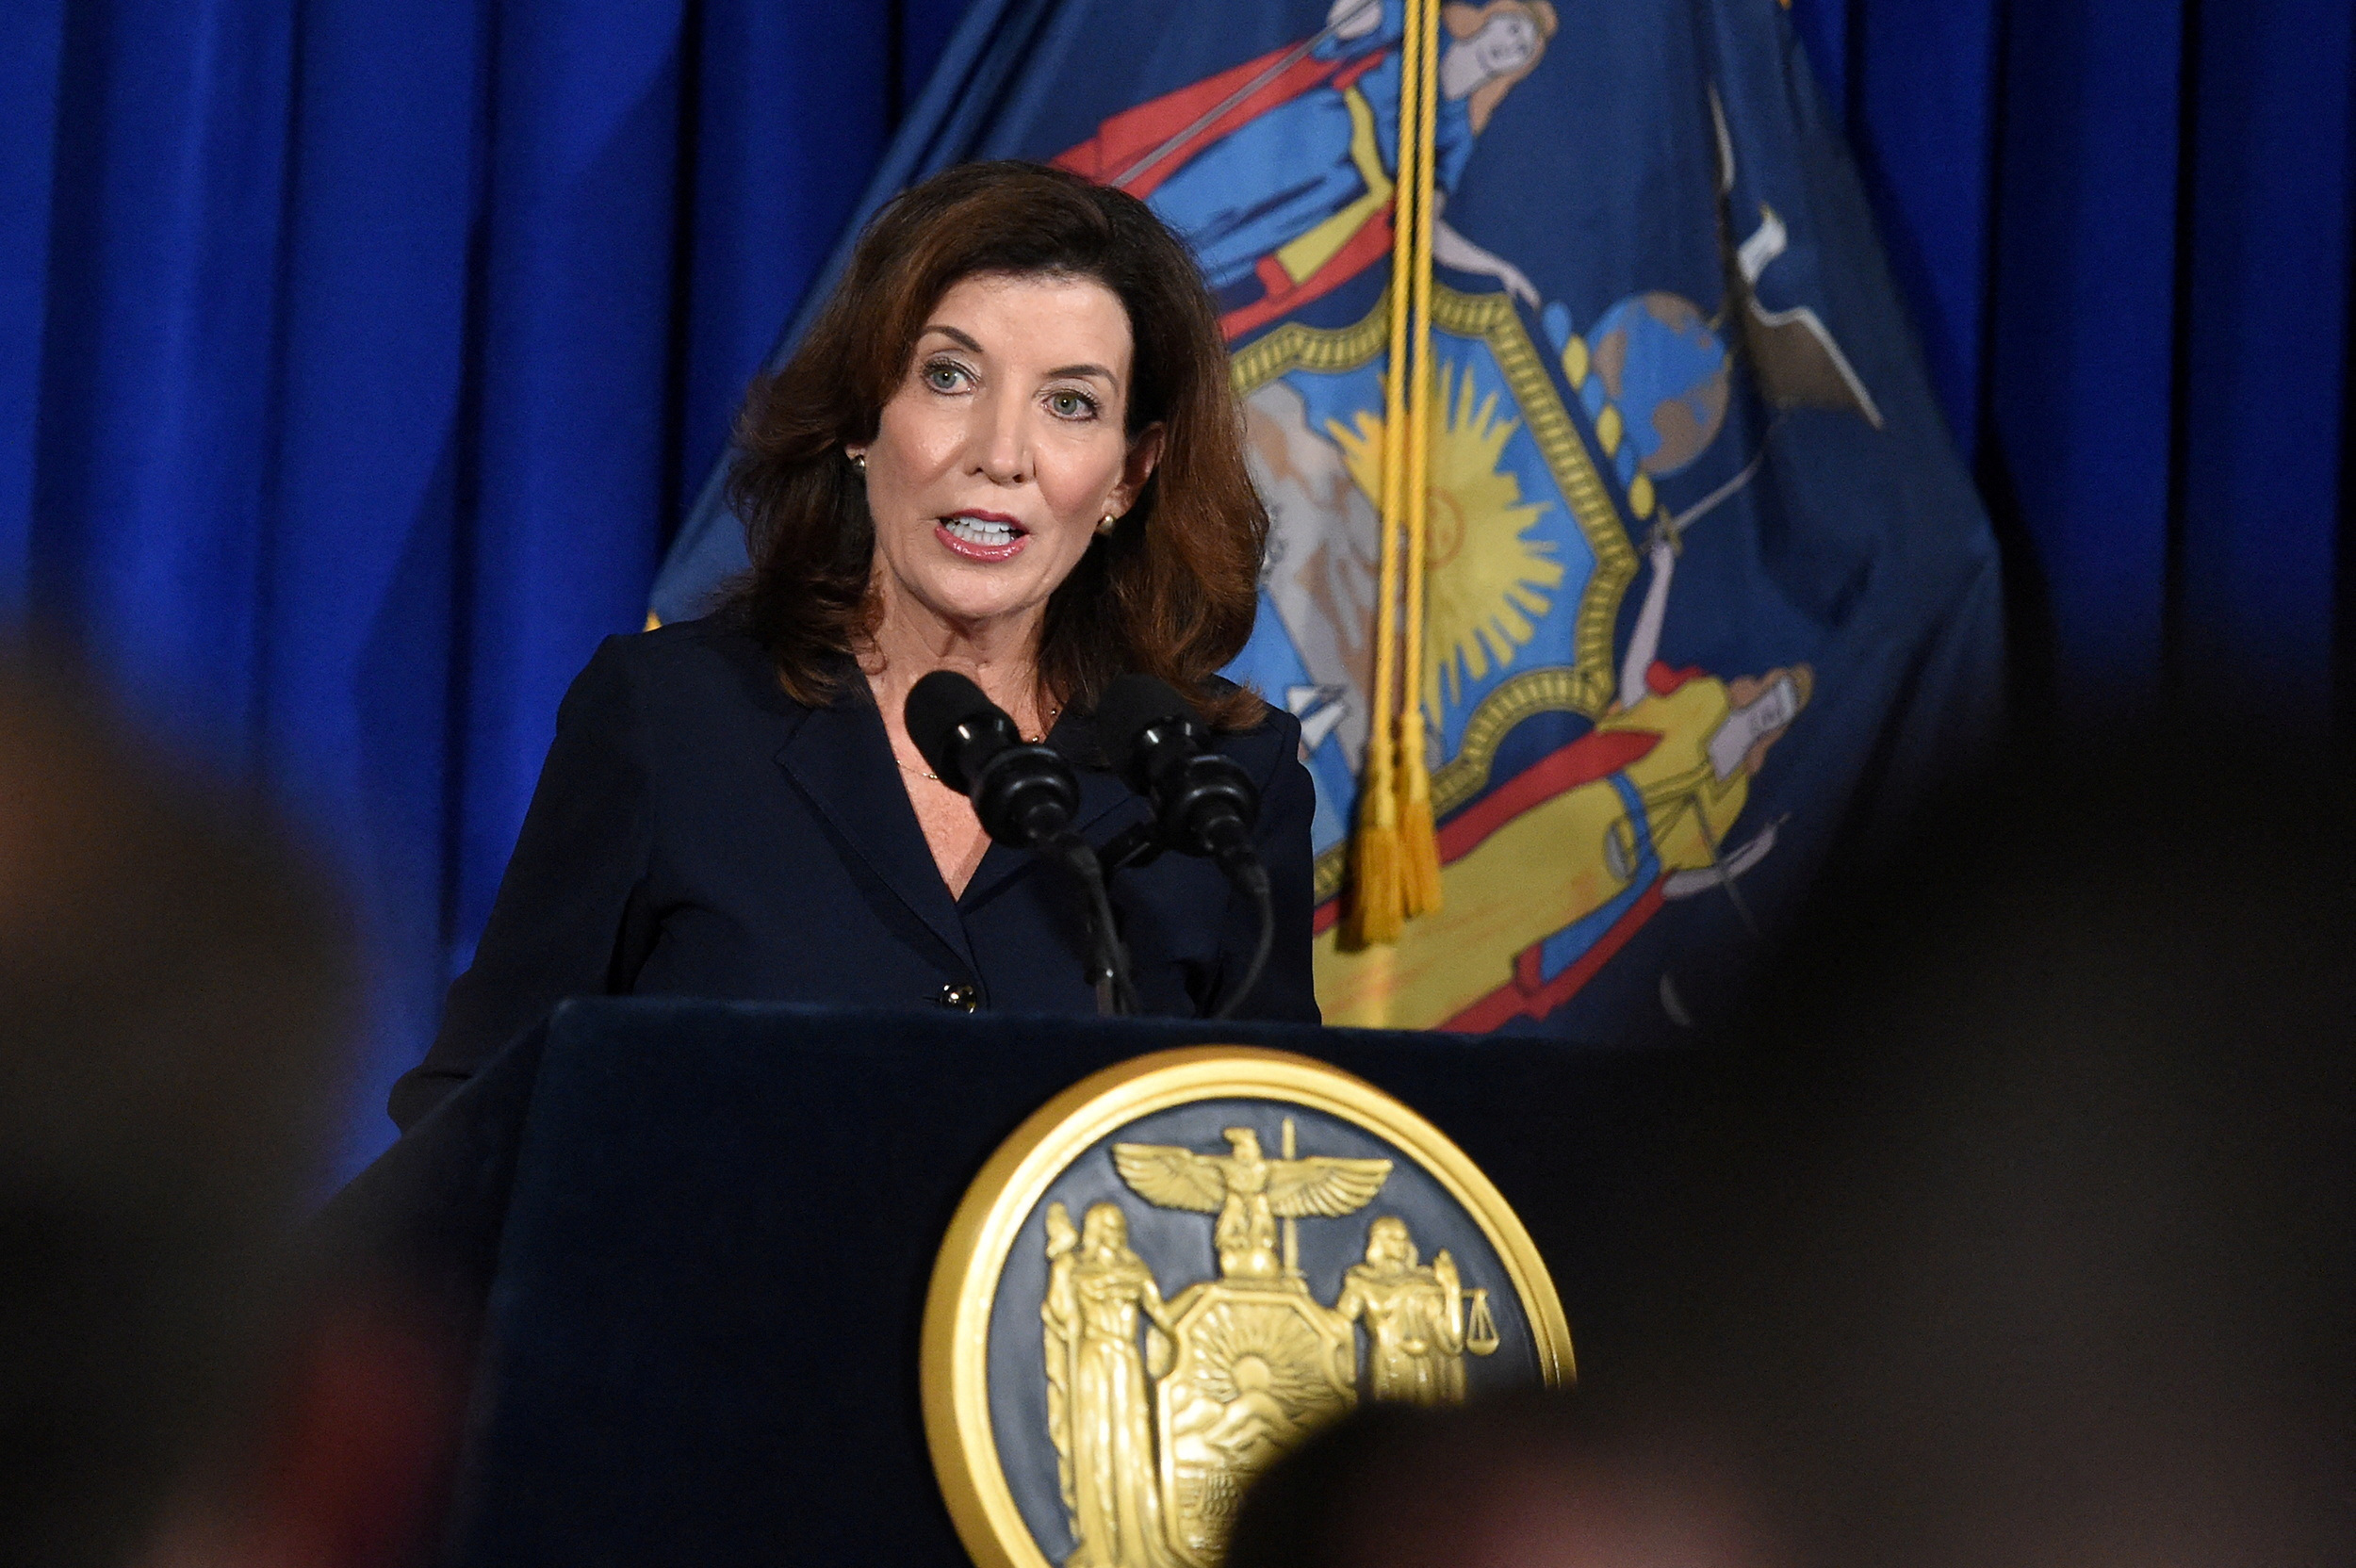 FILE PHOTO: New York Lieutenant Governor Kathy Hochul speaks during a news conference in Albany, New York, U.S., August 11, 2021.  REUTERS/Cindy Schultz/File Photo